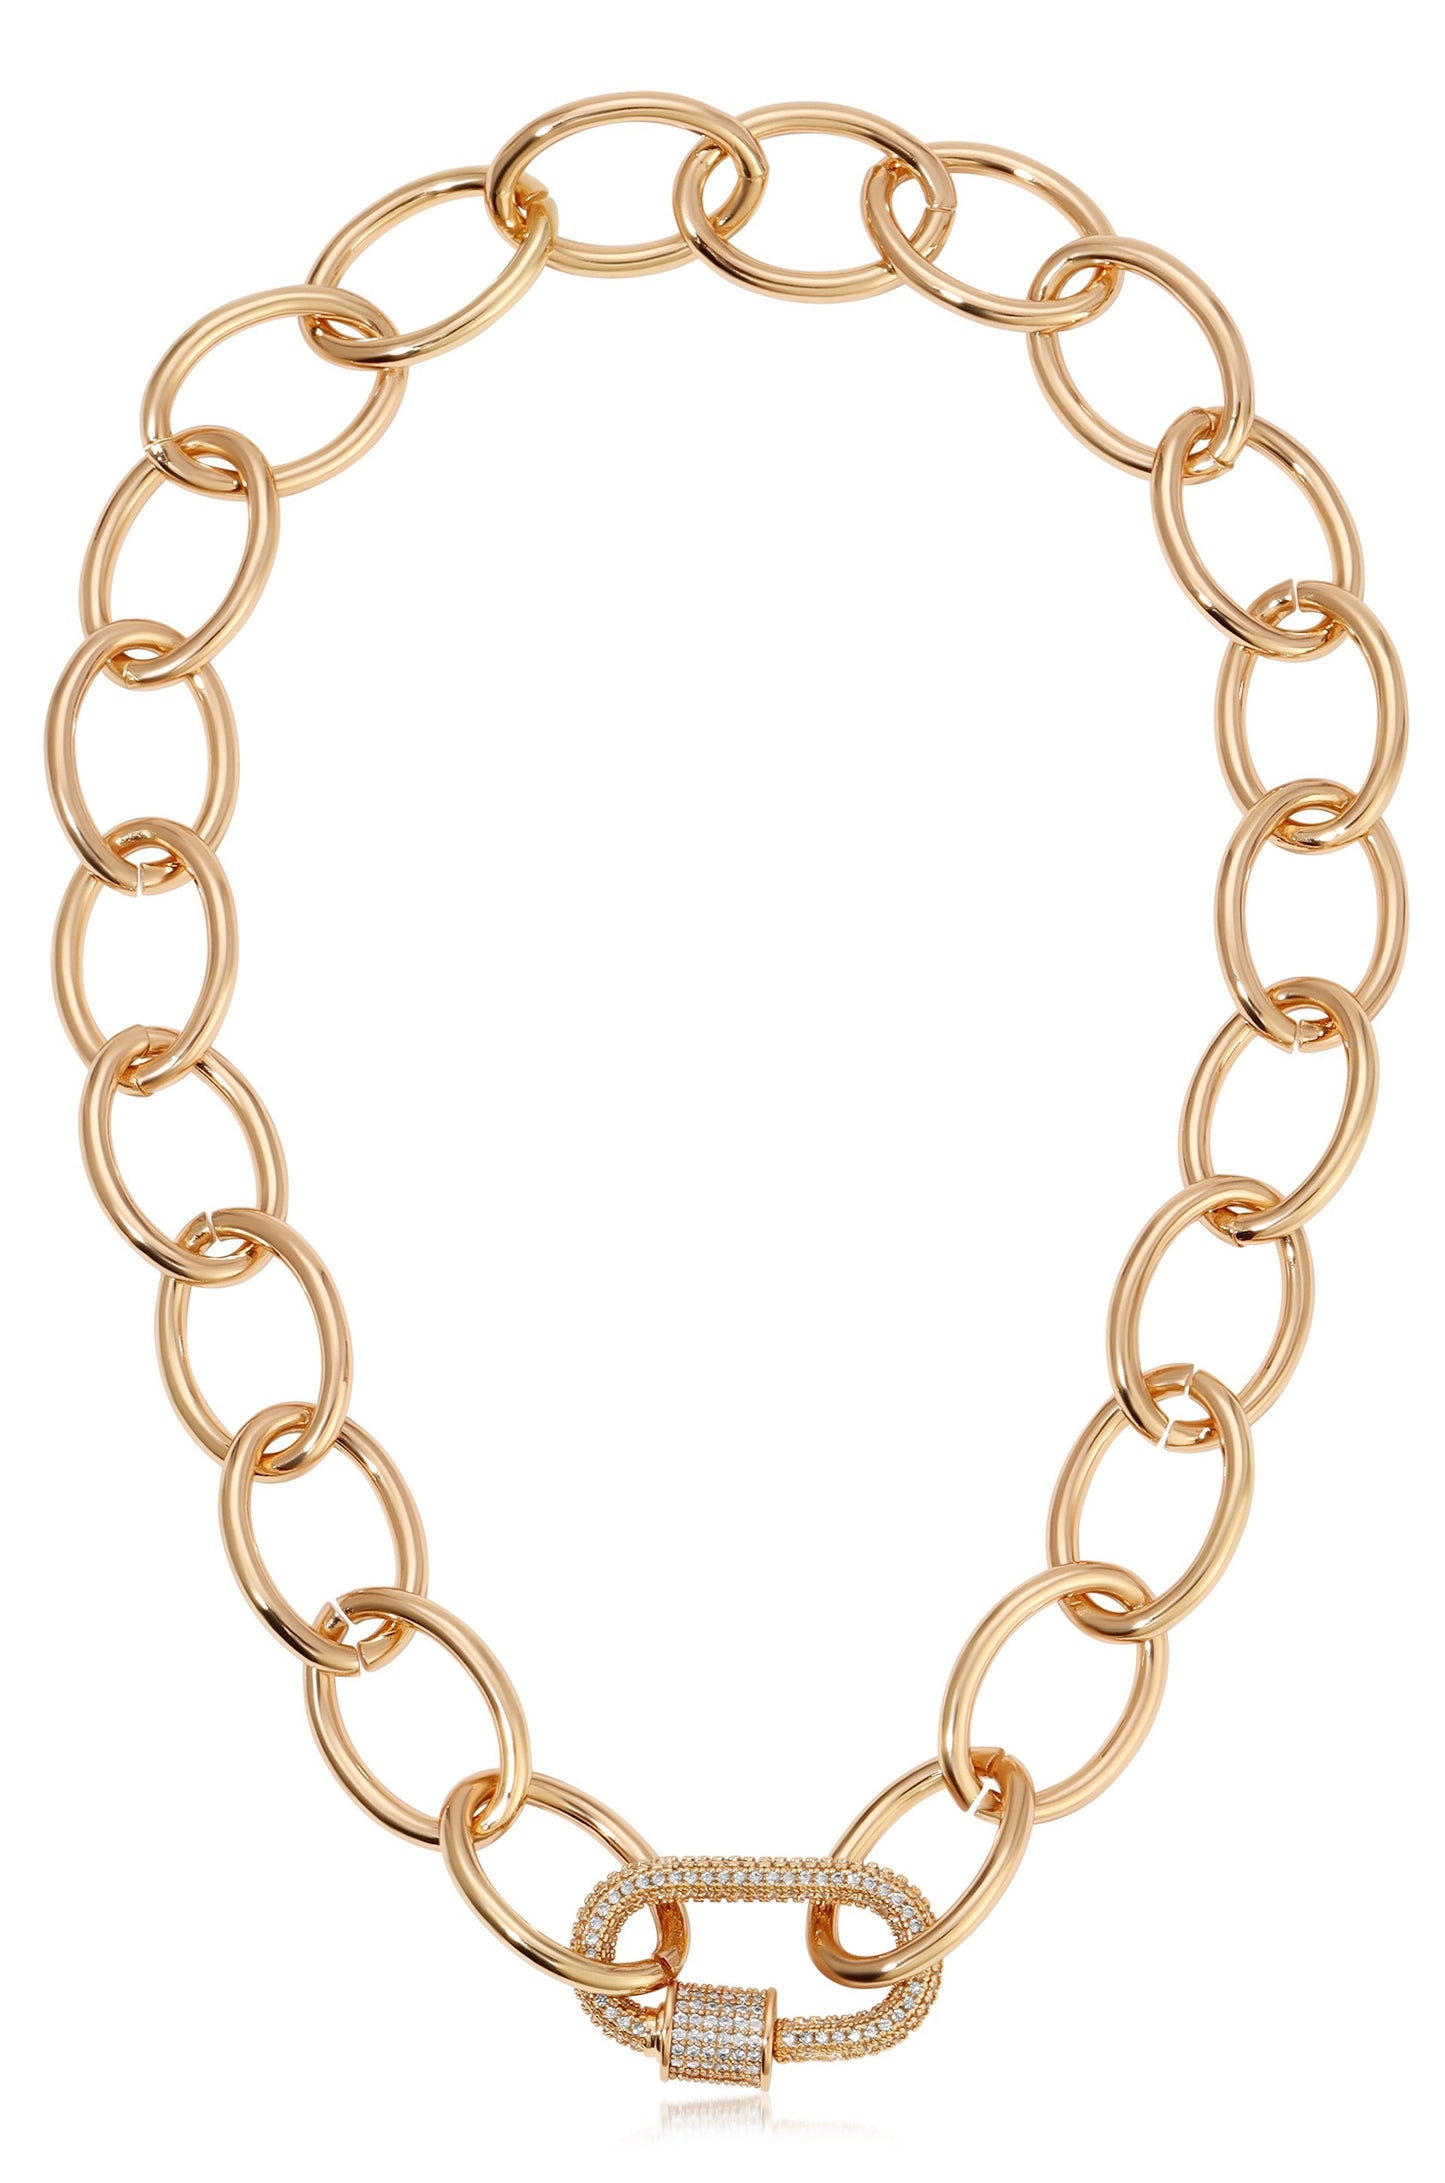 The Future in Links 18k Gold Plated Necklace